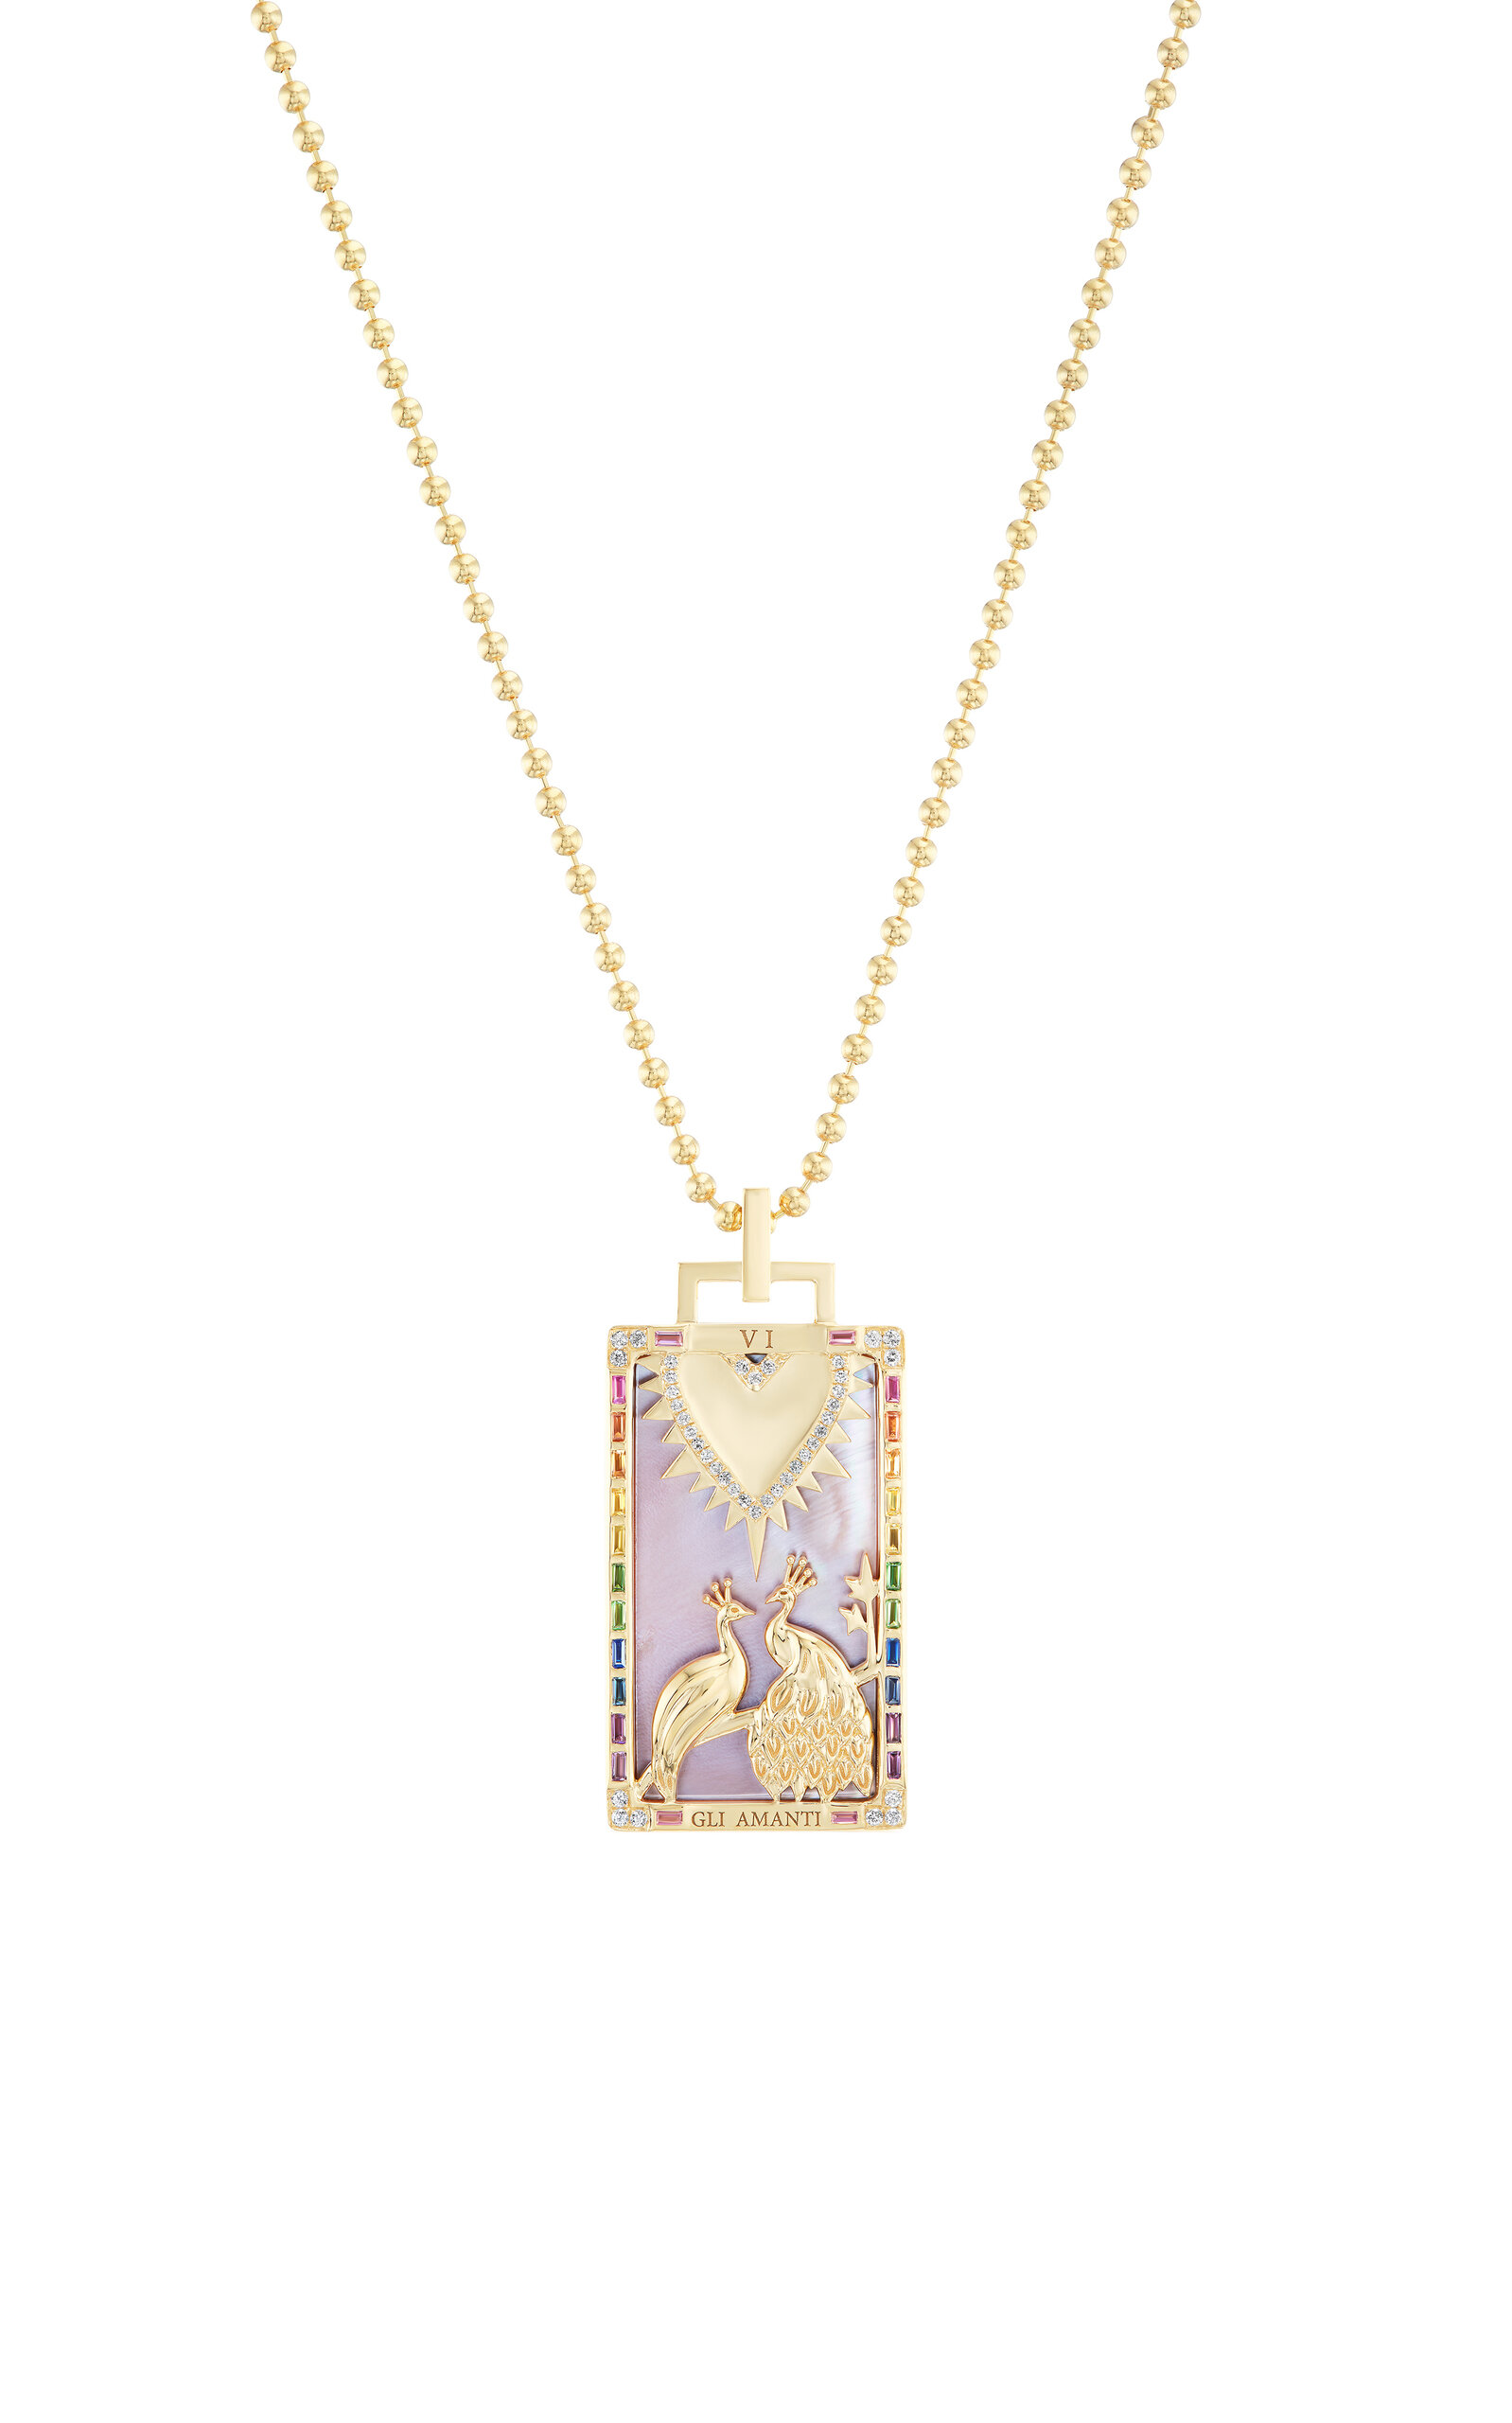 Gli Amanti Piccola 18K Yellow Gold Mother-of-Pearl Tarot Card Necklace